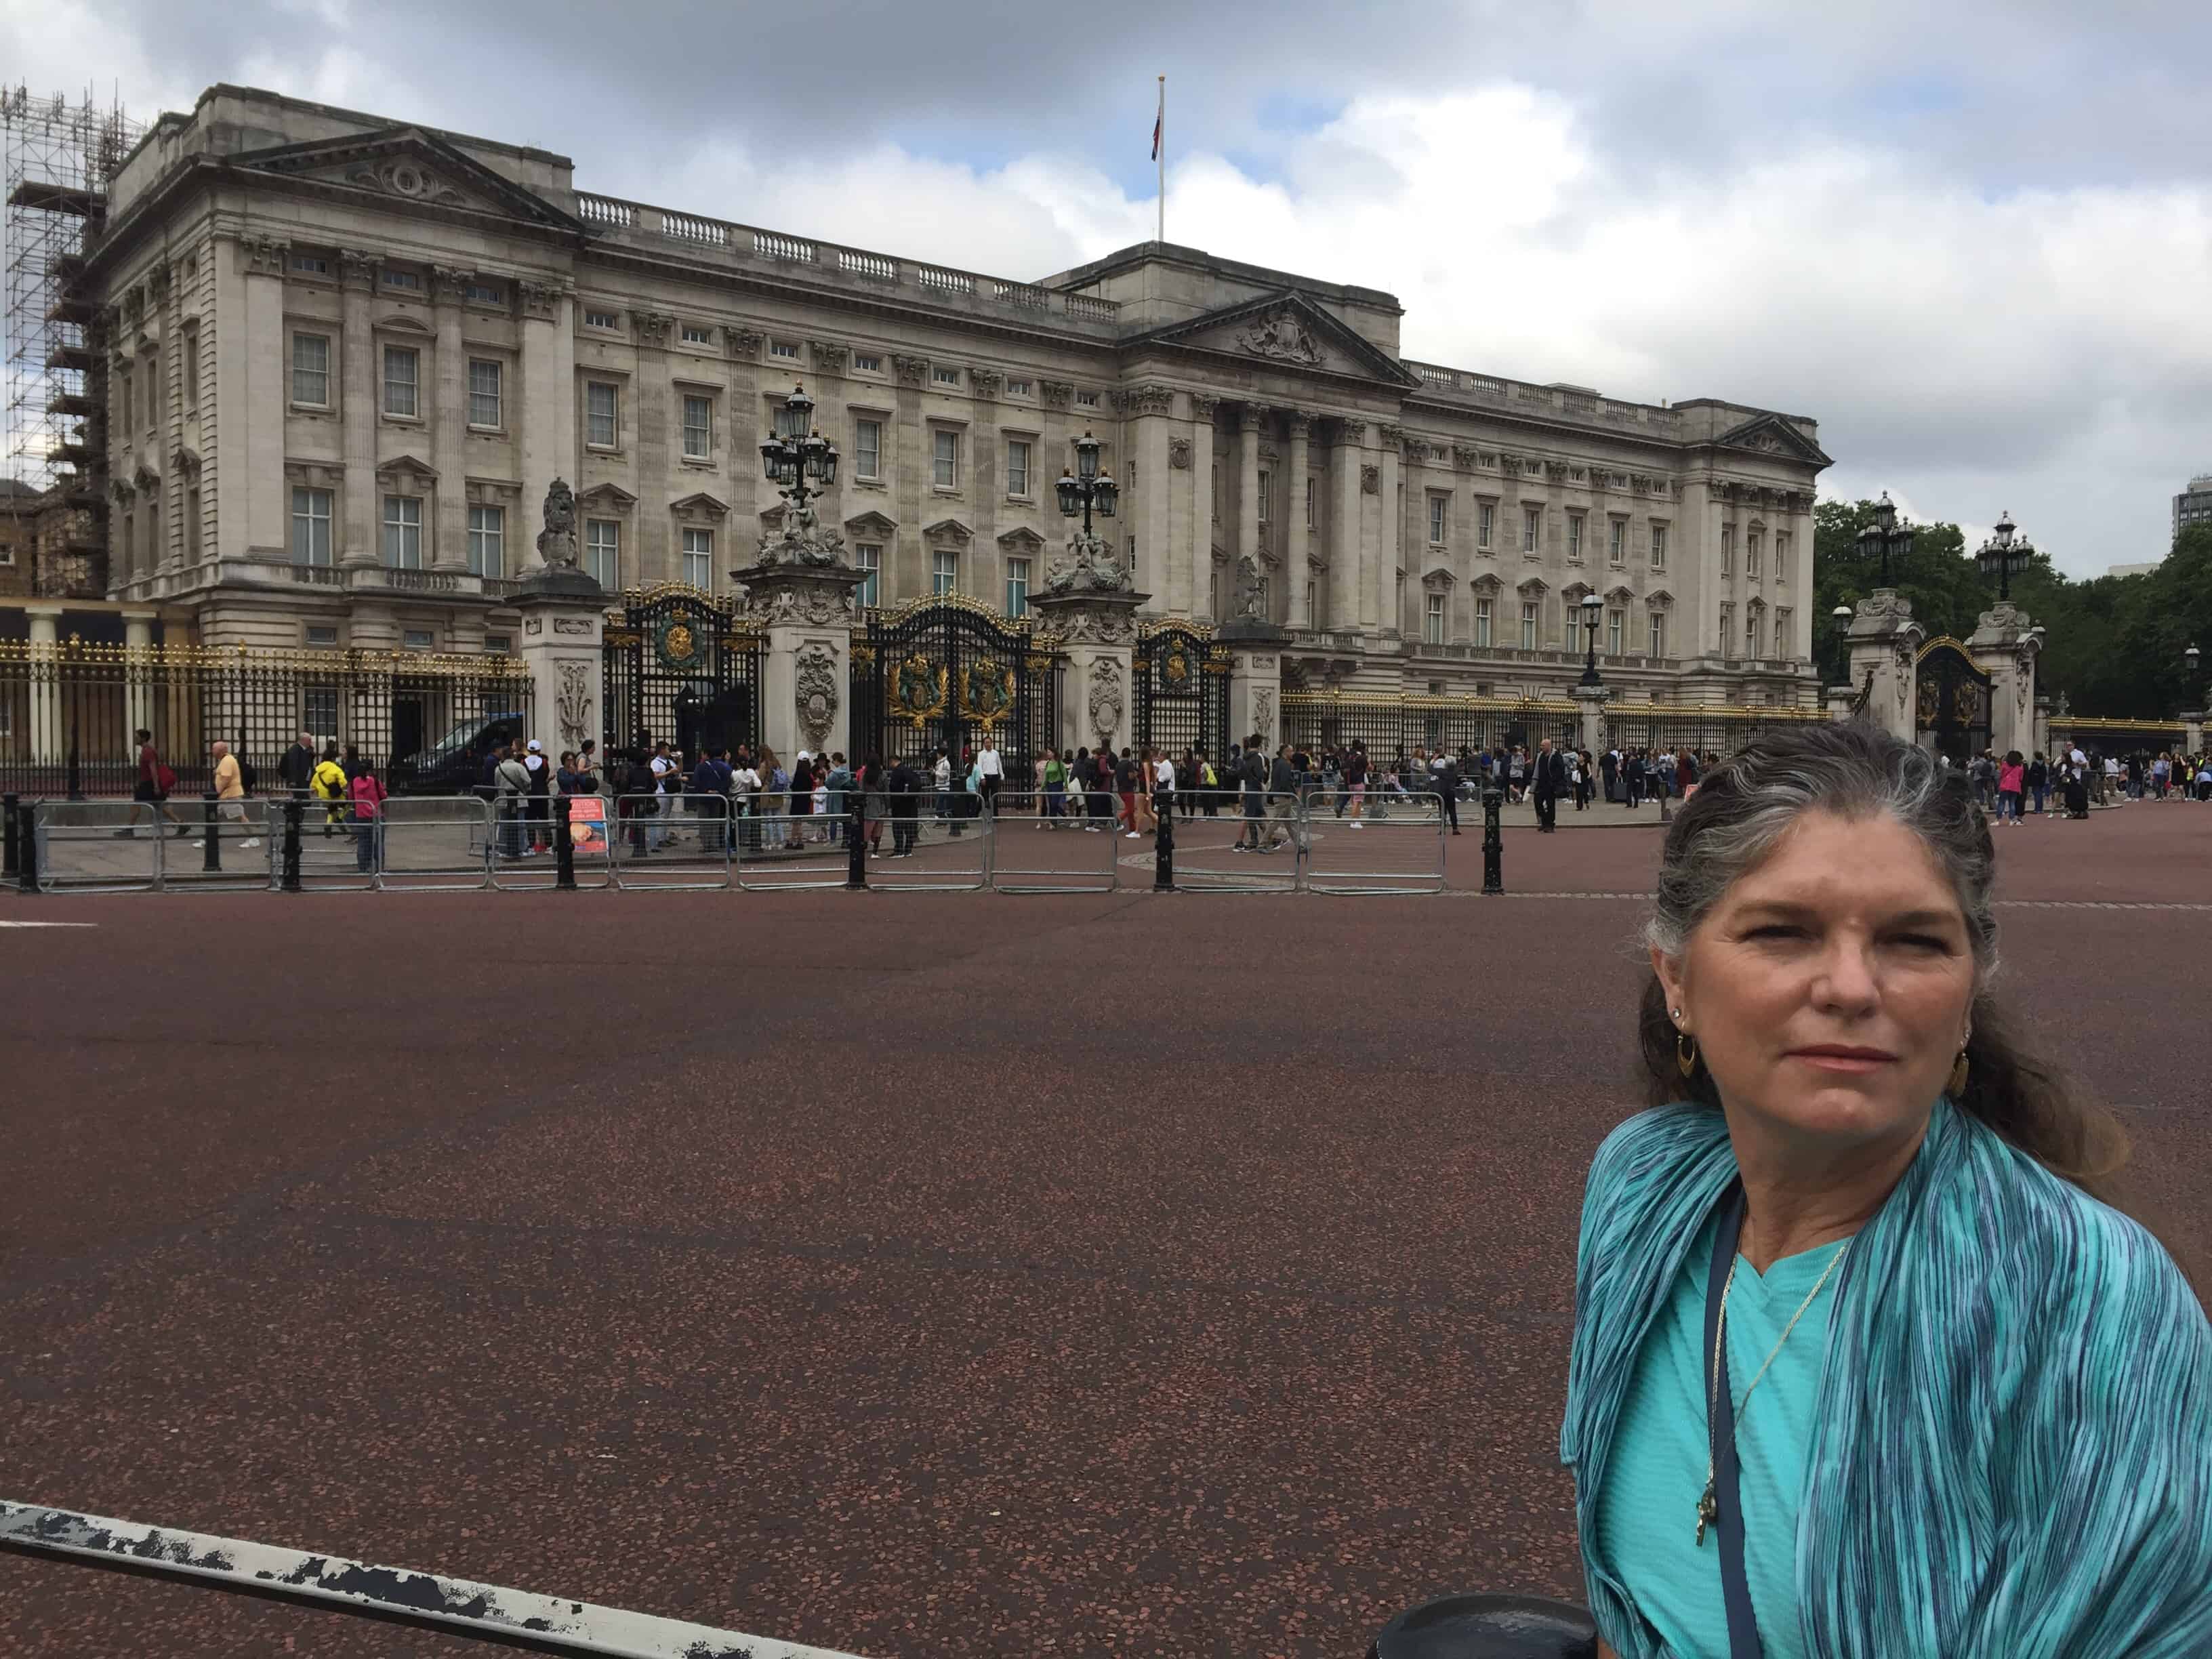 The Places Where We Go visit Buckingham Palace - standing outside the famous palace in London  prior to our morning visit to Buckingham Palace.